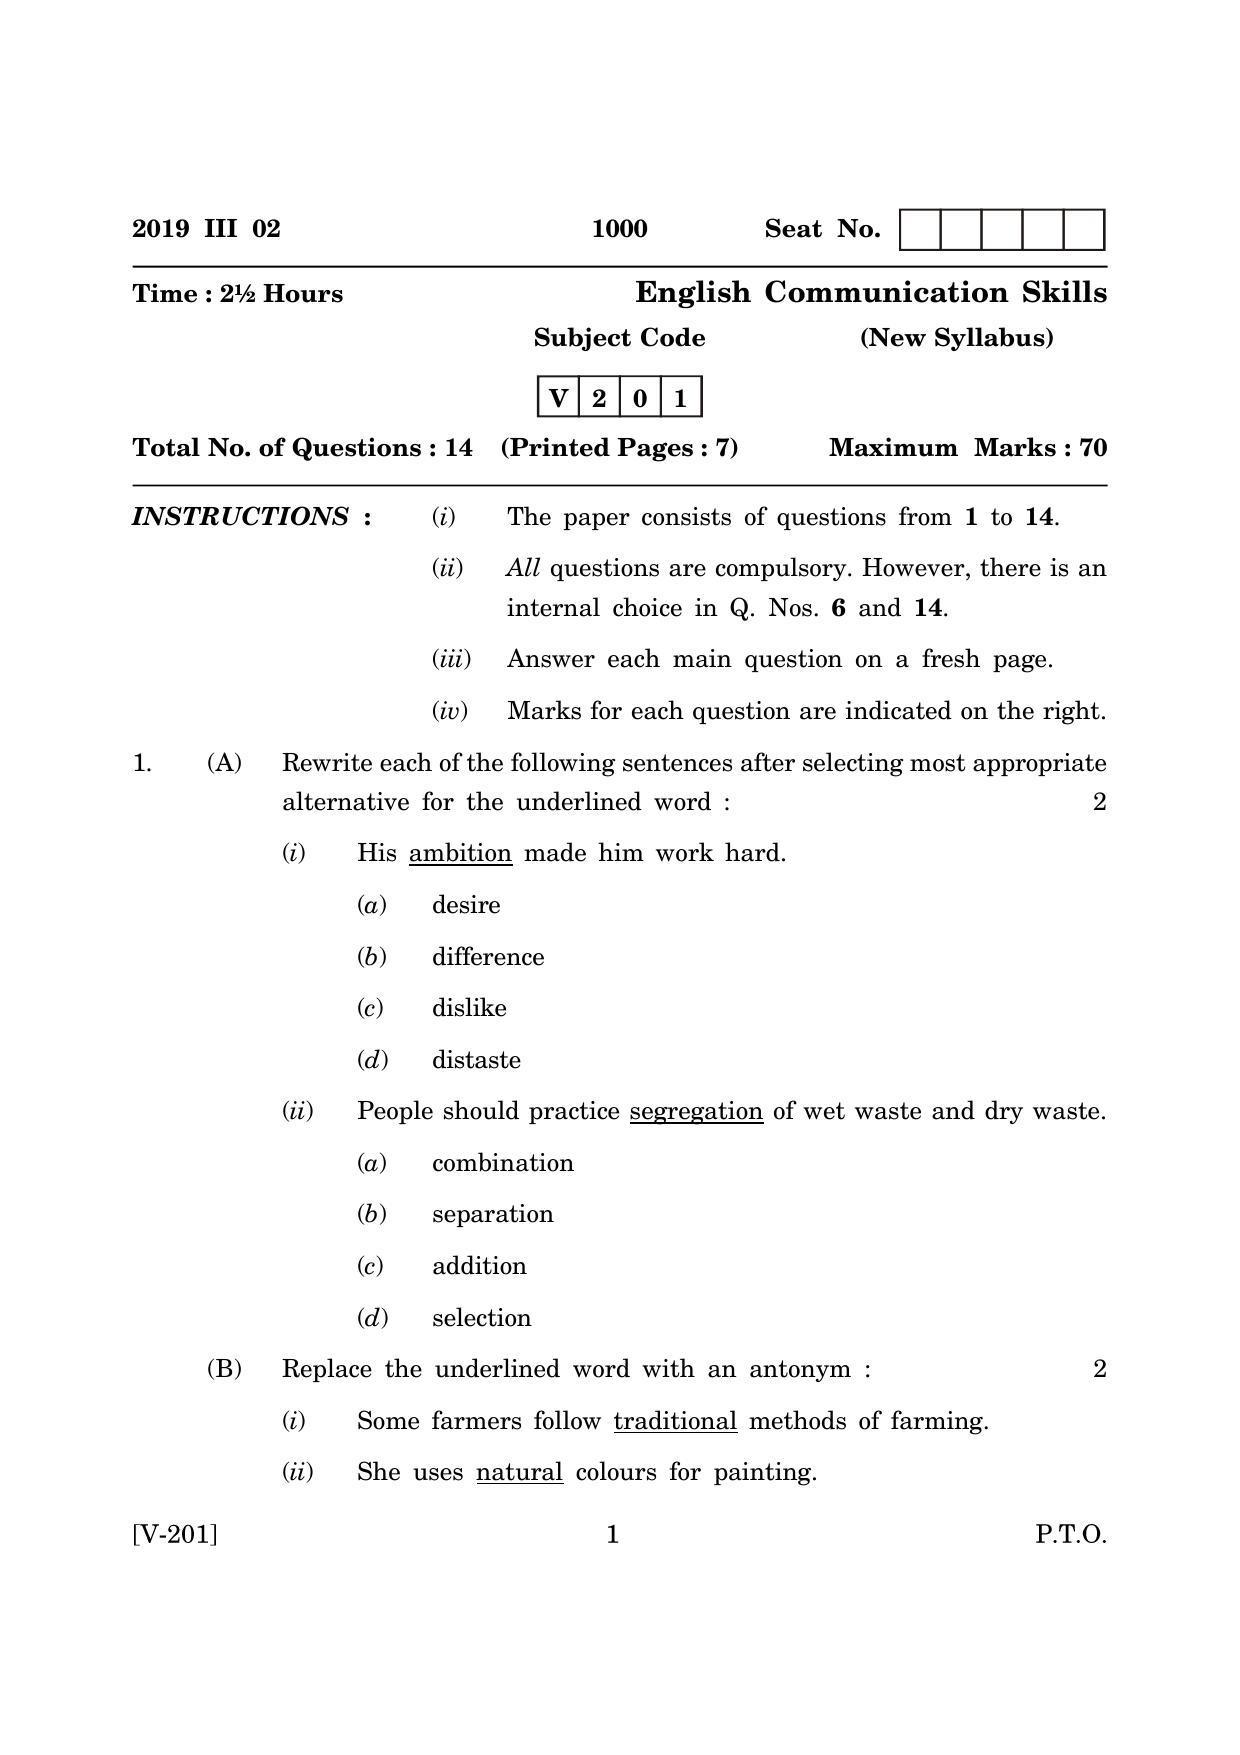 Goa Board Class 12 English Communication Skills  2019 (March 2019) Question Paper - Page 1